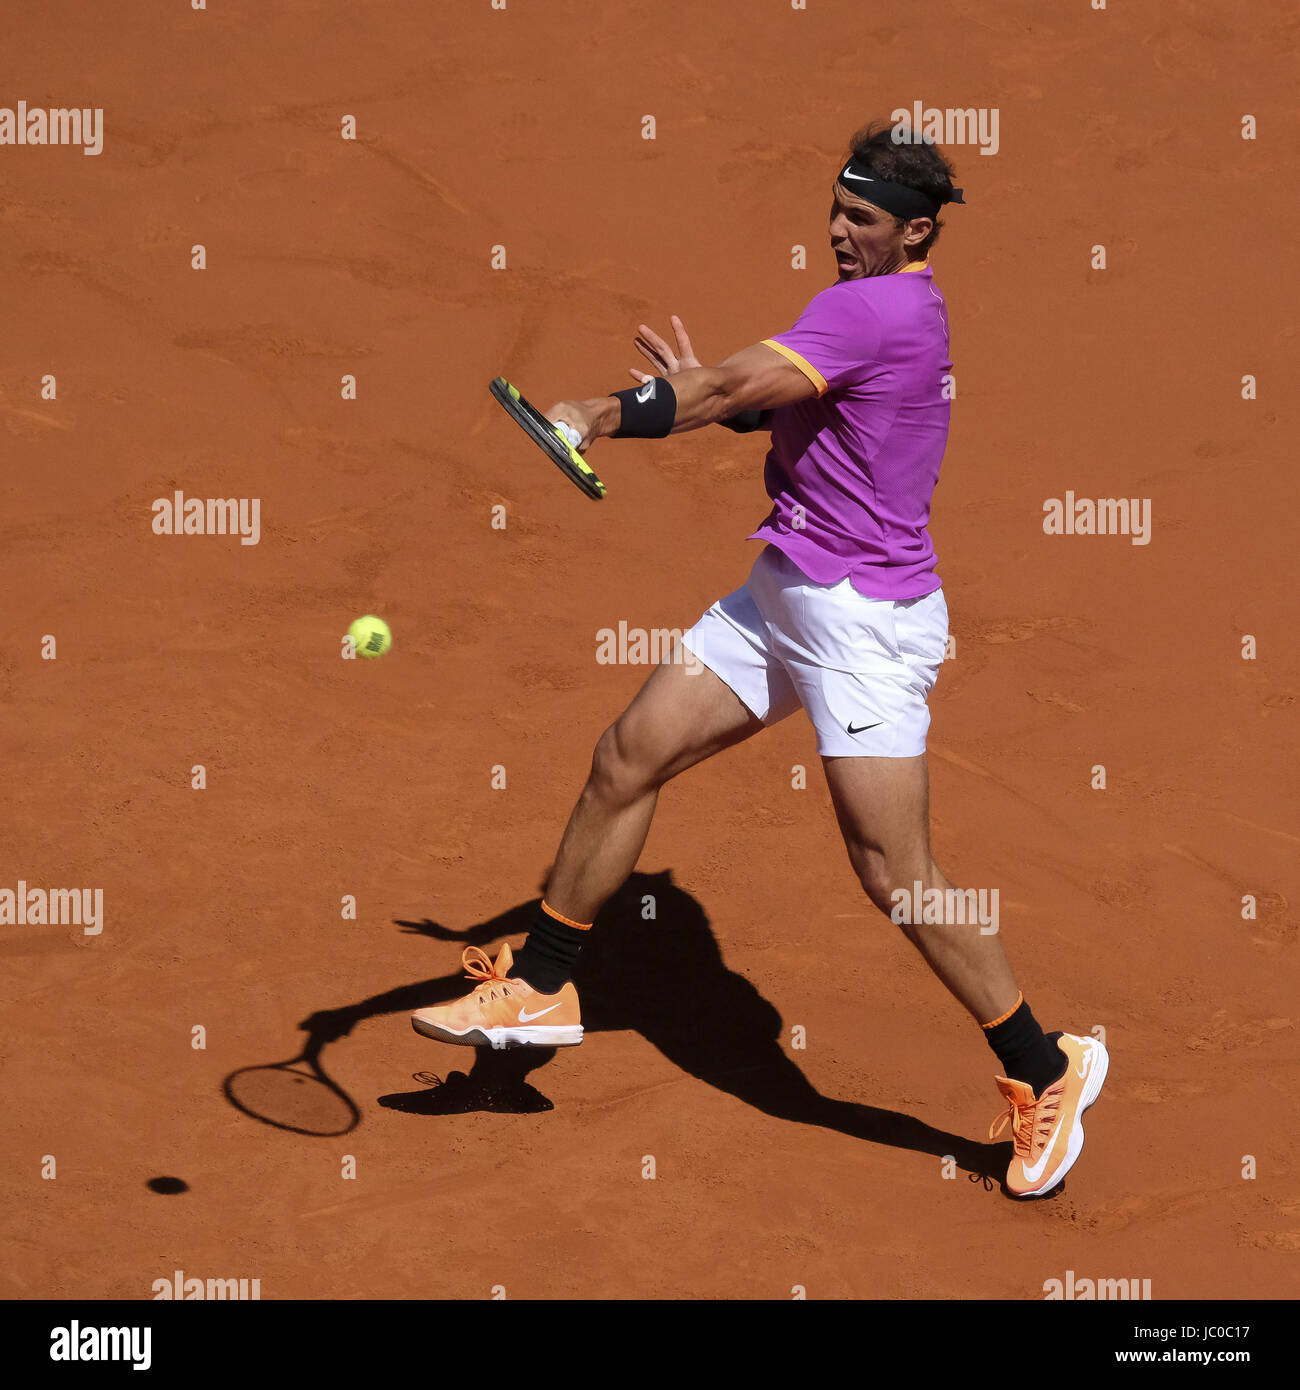 Rafael Nadal of Spain in action against Novak Djokovic of Serbia during the Semifinals day 8 of the Mutua Madrid Open Tennis at La Caja Magica  Featuring: Rafael Nada Where: Madrid, Spain When: 13 May 2017 Credit: Oscar Gonzalez/WENN.com Stock Photo